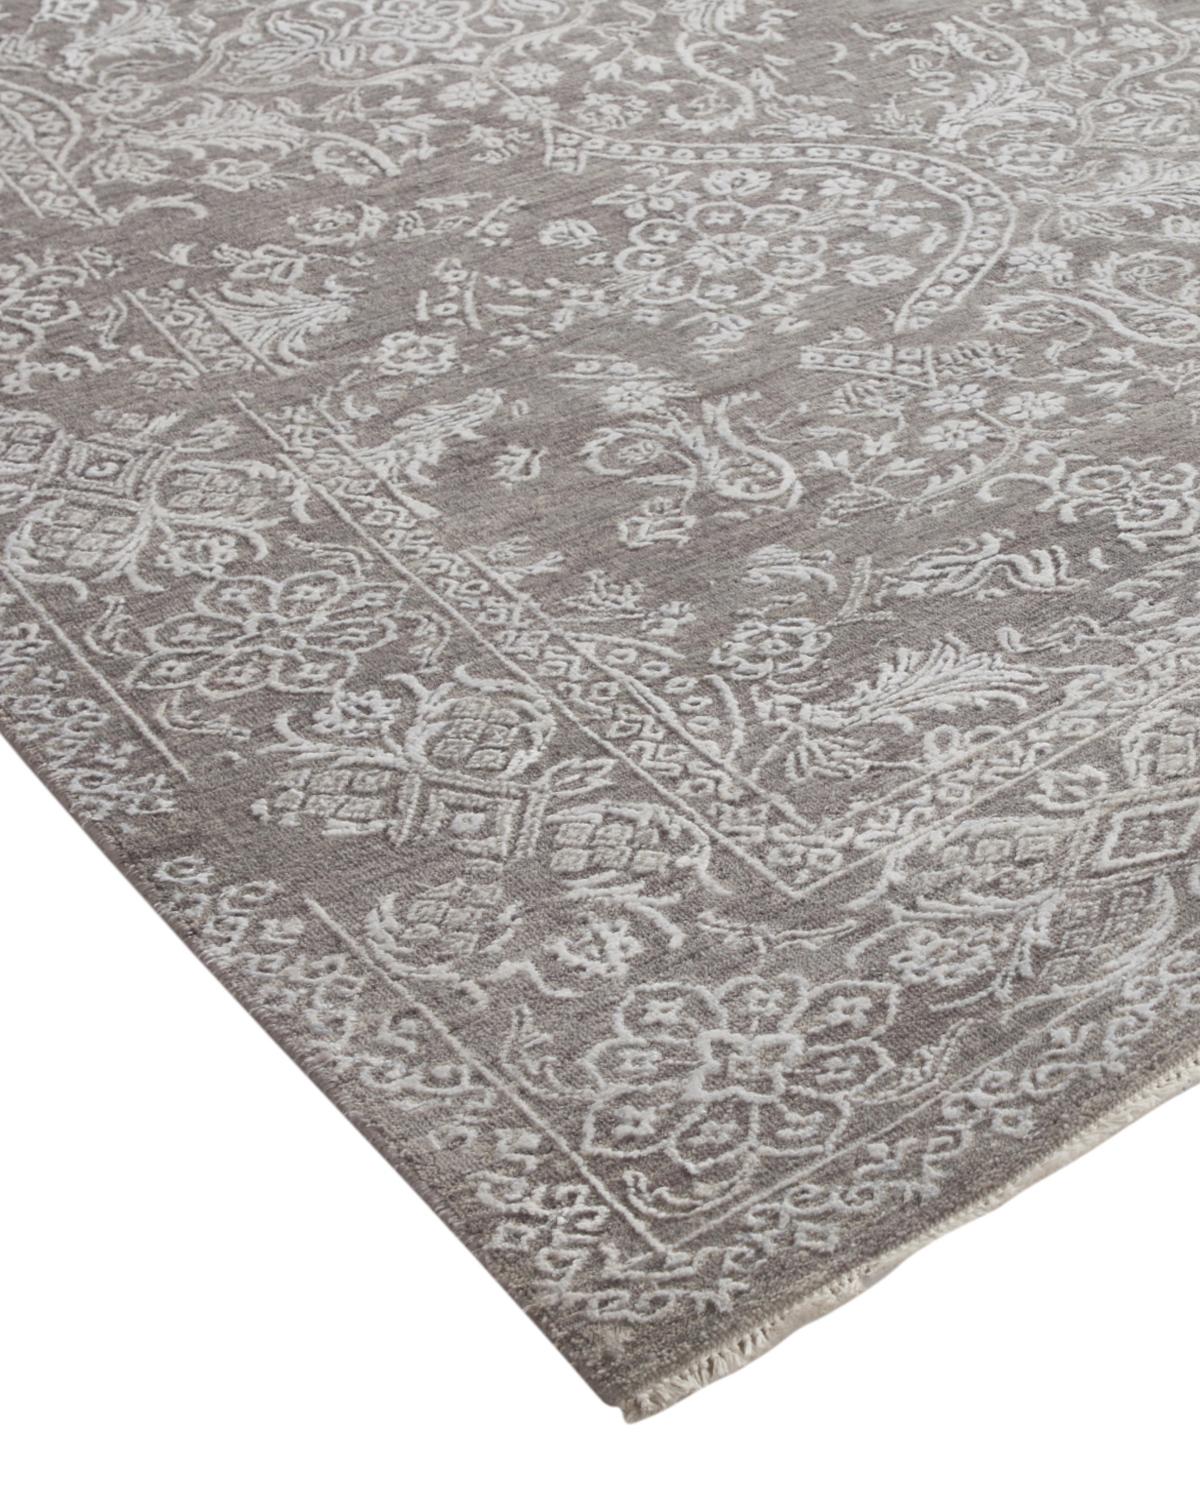 Color: Gray - Made In: India. 60% Wool, 30% Viscose, 10% Cotton. Fresh, spirited, and above all, luxurious, the rugs of the Modern collection can invigorate a traditional room as gracefully as they can ground a more contemporary space. Regardless of